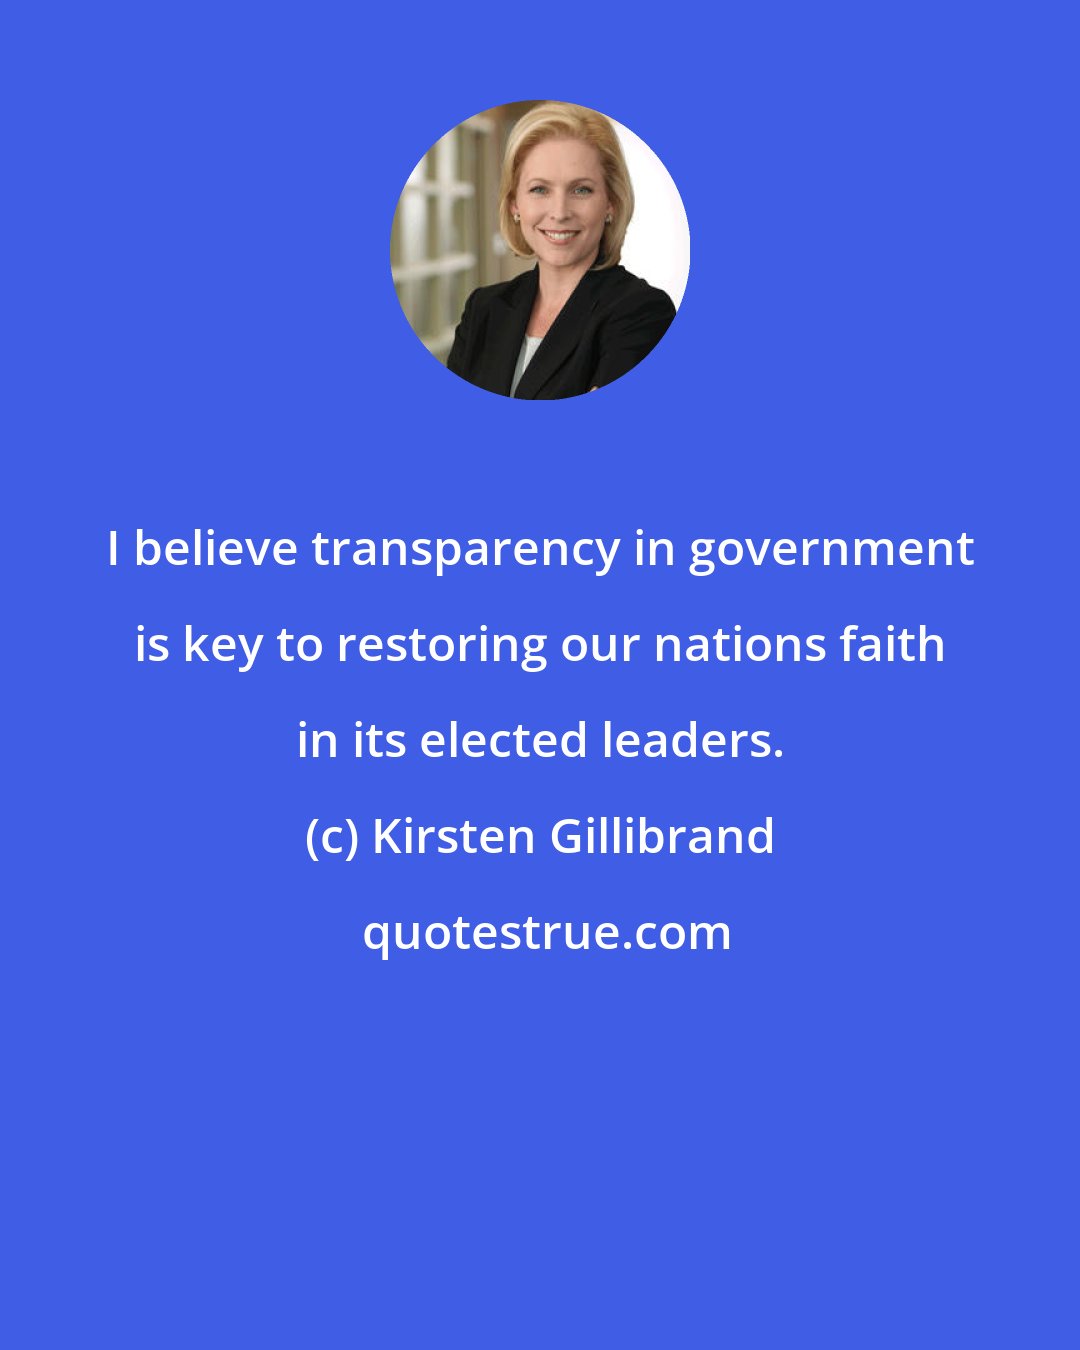 Kirsten Gillibrand: I believe transparency in government is key to restoring our nations faith in its elected leaders.